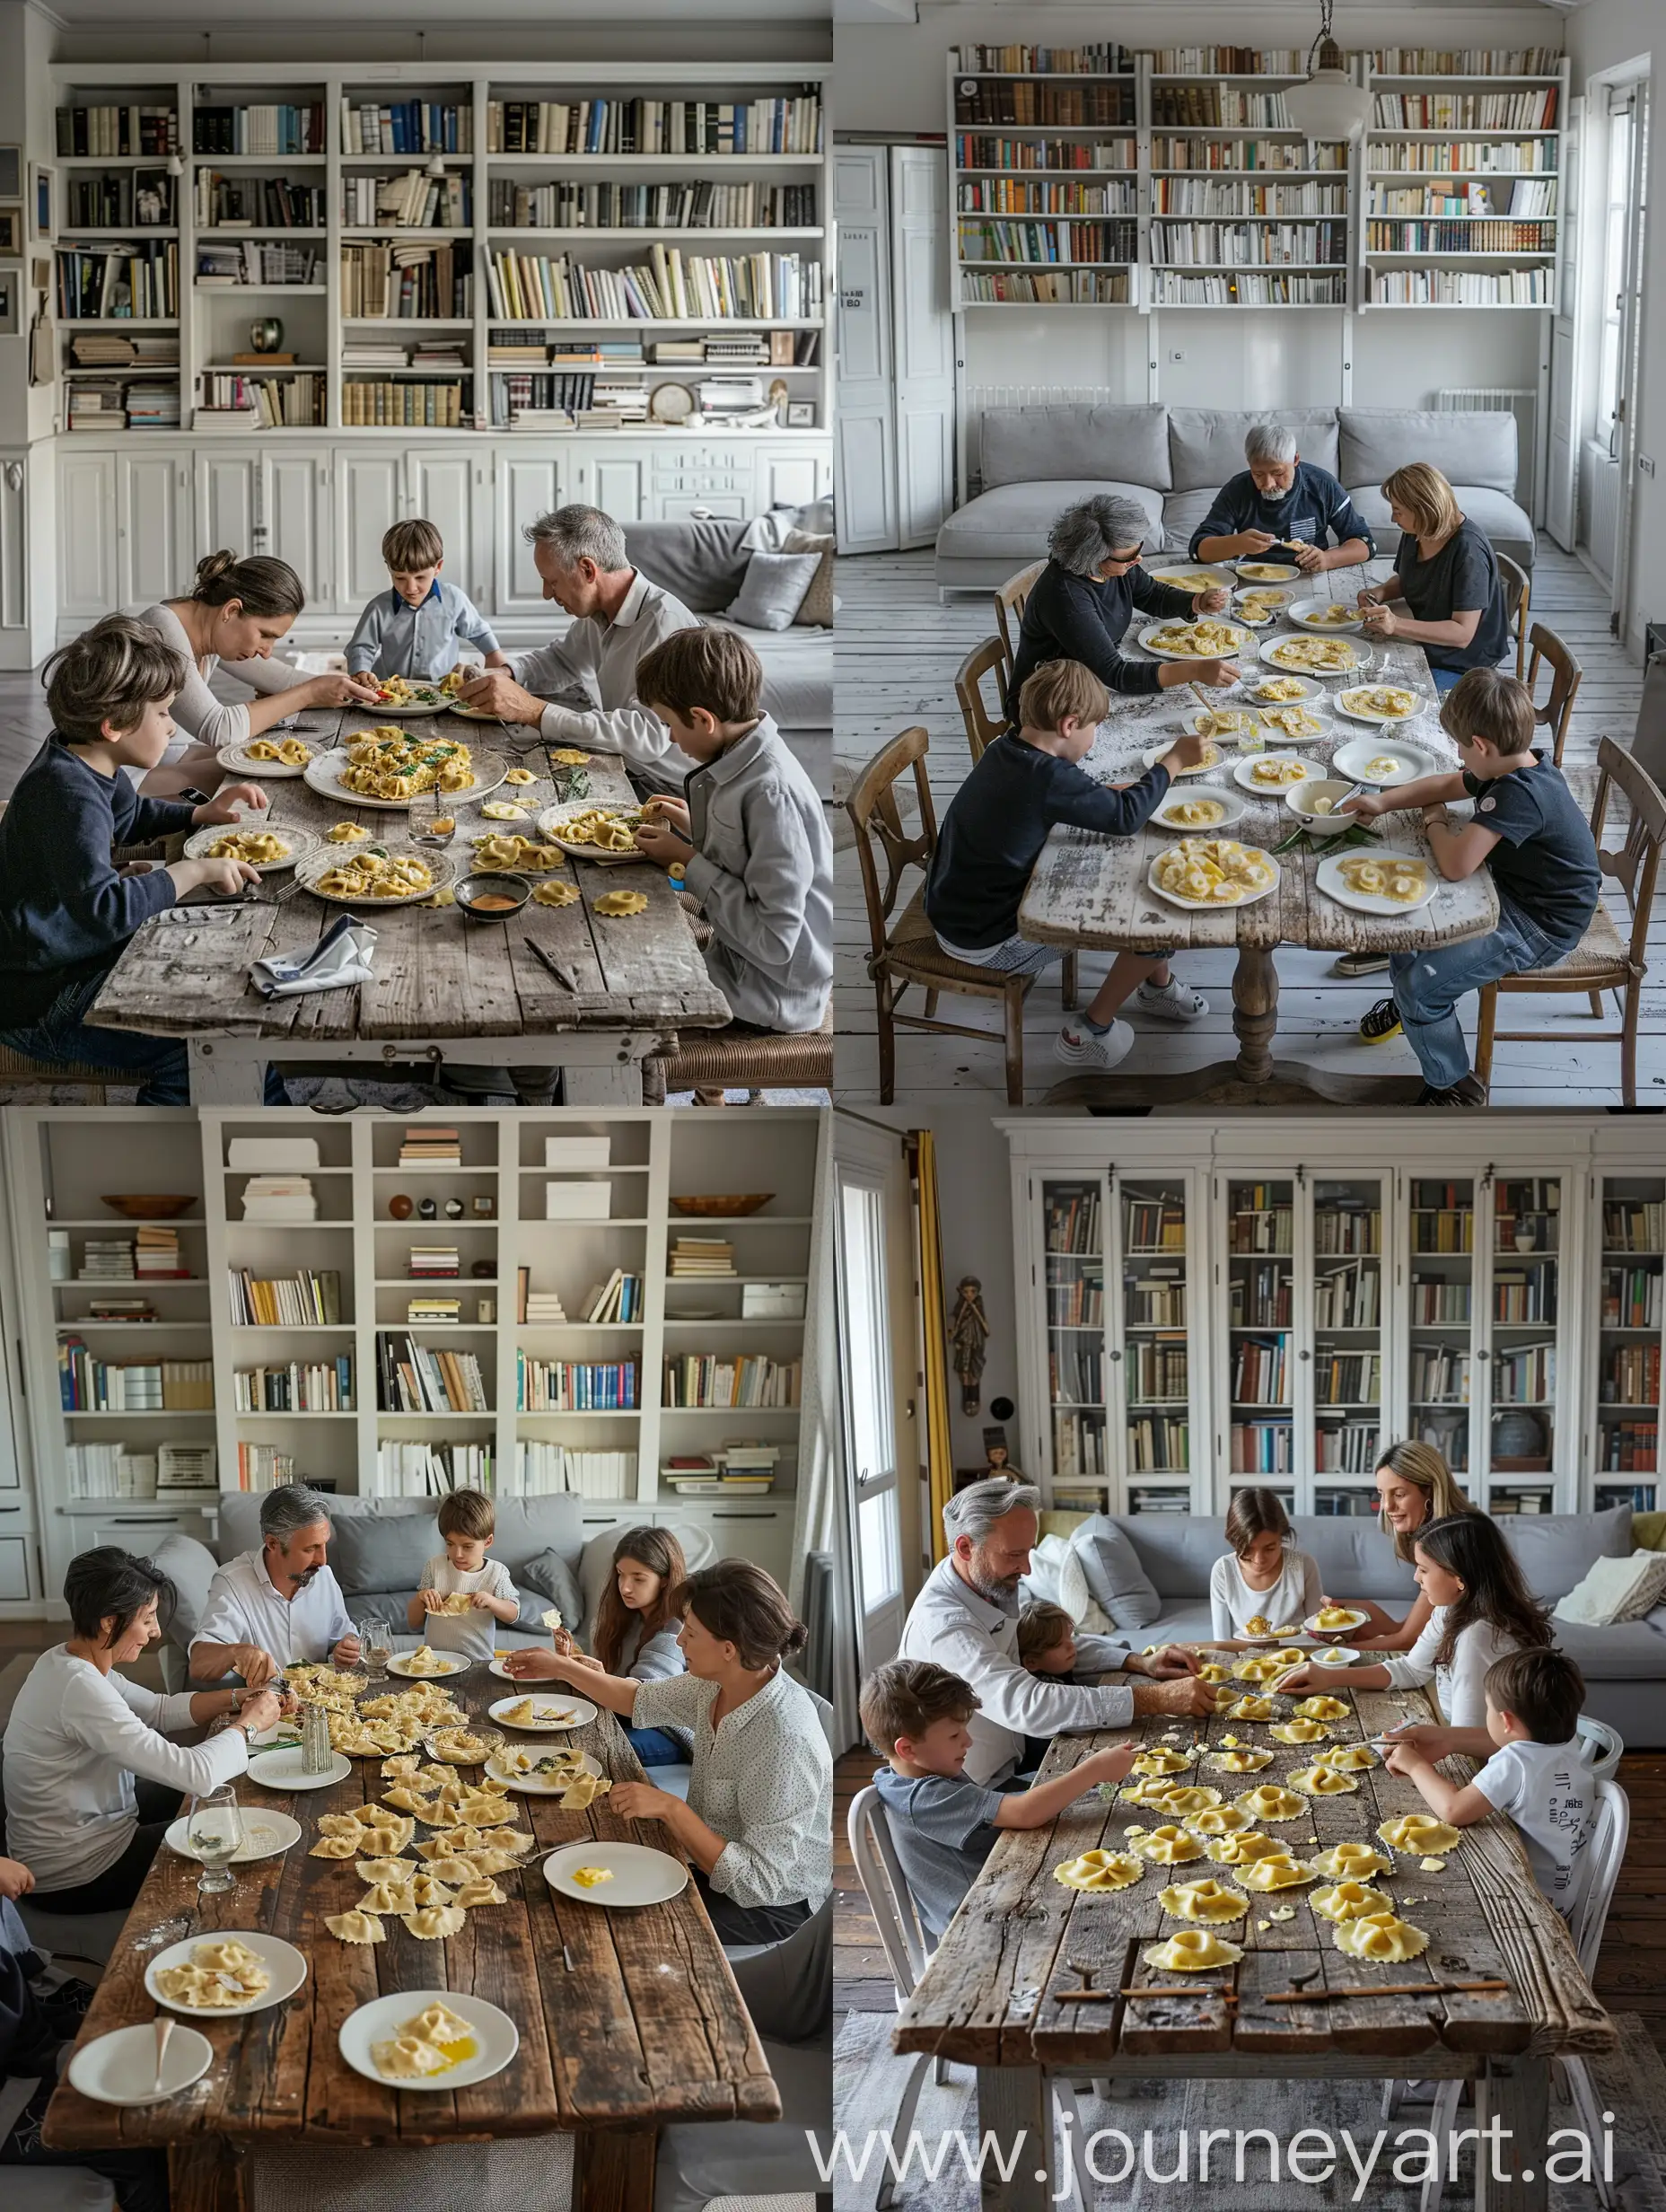 seven people are at dinner, two 50-year-old fathers, two 40-year-old mothers and three 8-year-old sons, they are sitting around an ancient wooden table, they are eating stuffed ravioli seasoned with butter and sage, in the room there is a three meter long white bookcase on the wall full of books, in the room there is a three-seater gray sofa with chaise longue, 8pm in the evening